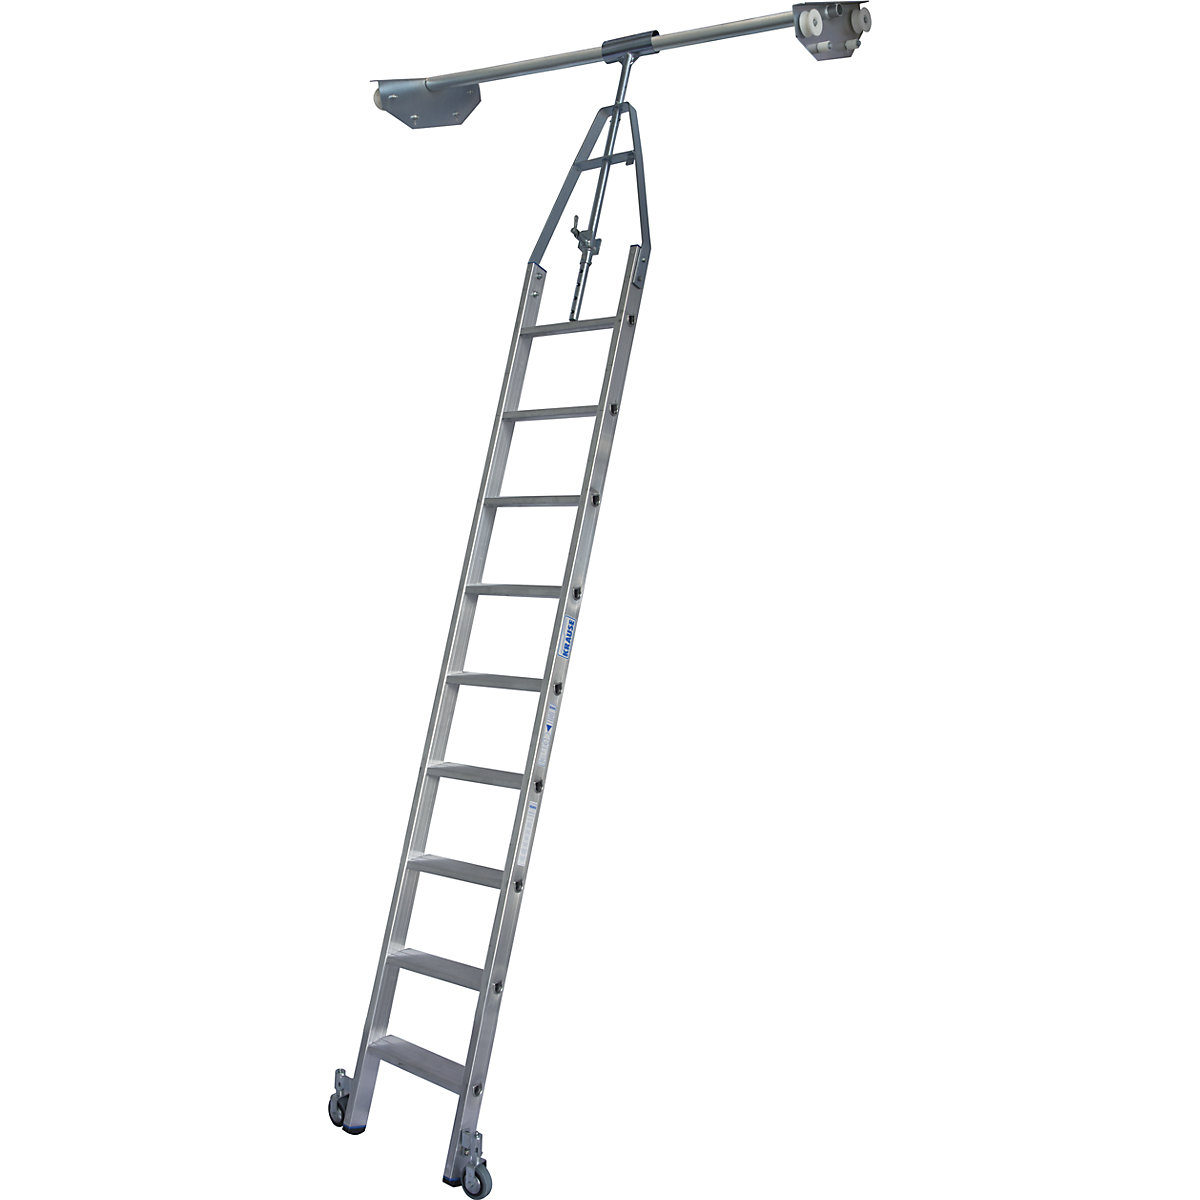 Step shelf ladder – KRAUSE, double sided shelf unit with wheel unit on top for round tubing rail system, 9 steps-8